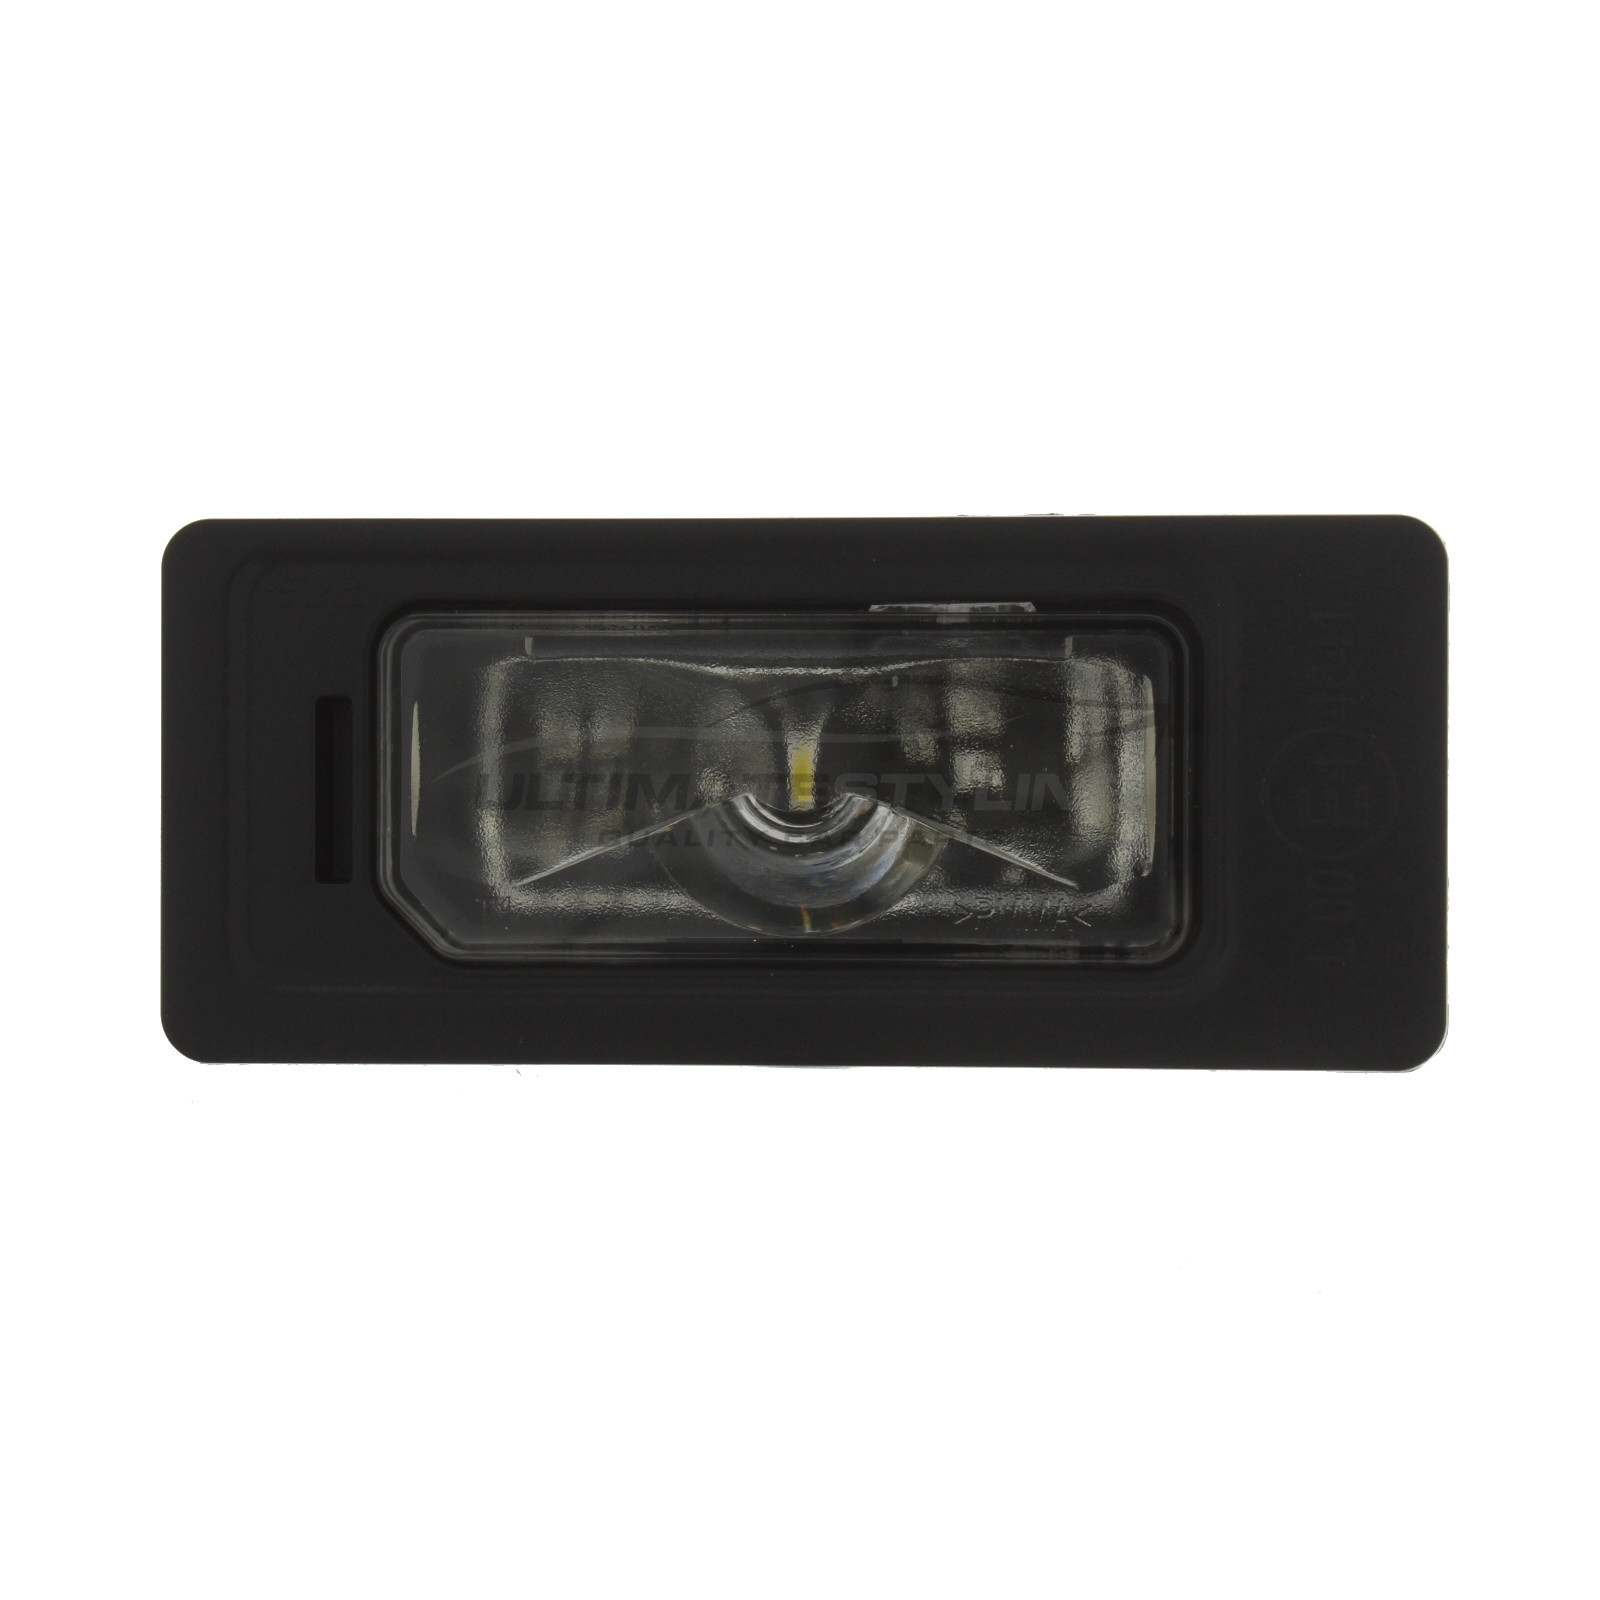 Rear Number Plate Light - Universal (LH or RH) for Audi A1 , A3 , A4 , A6 , A7 , Q3 , Q7 , RS3 , RS4 , RS6 , RS7 , RSQ3 , S1 , S3 , S4 , S6 , S7 , SQ7 / Seat Alhambra , Ateca / Skoda Fabia , Karoq , Kodiaq , Octavia / VW Caddy , Caravelle and others